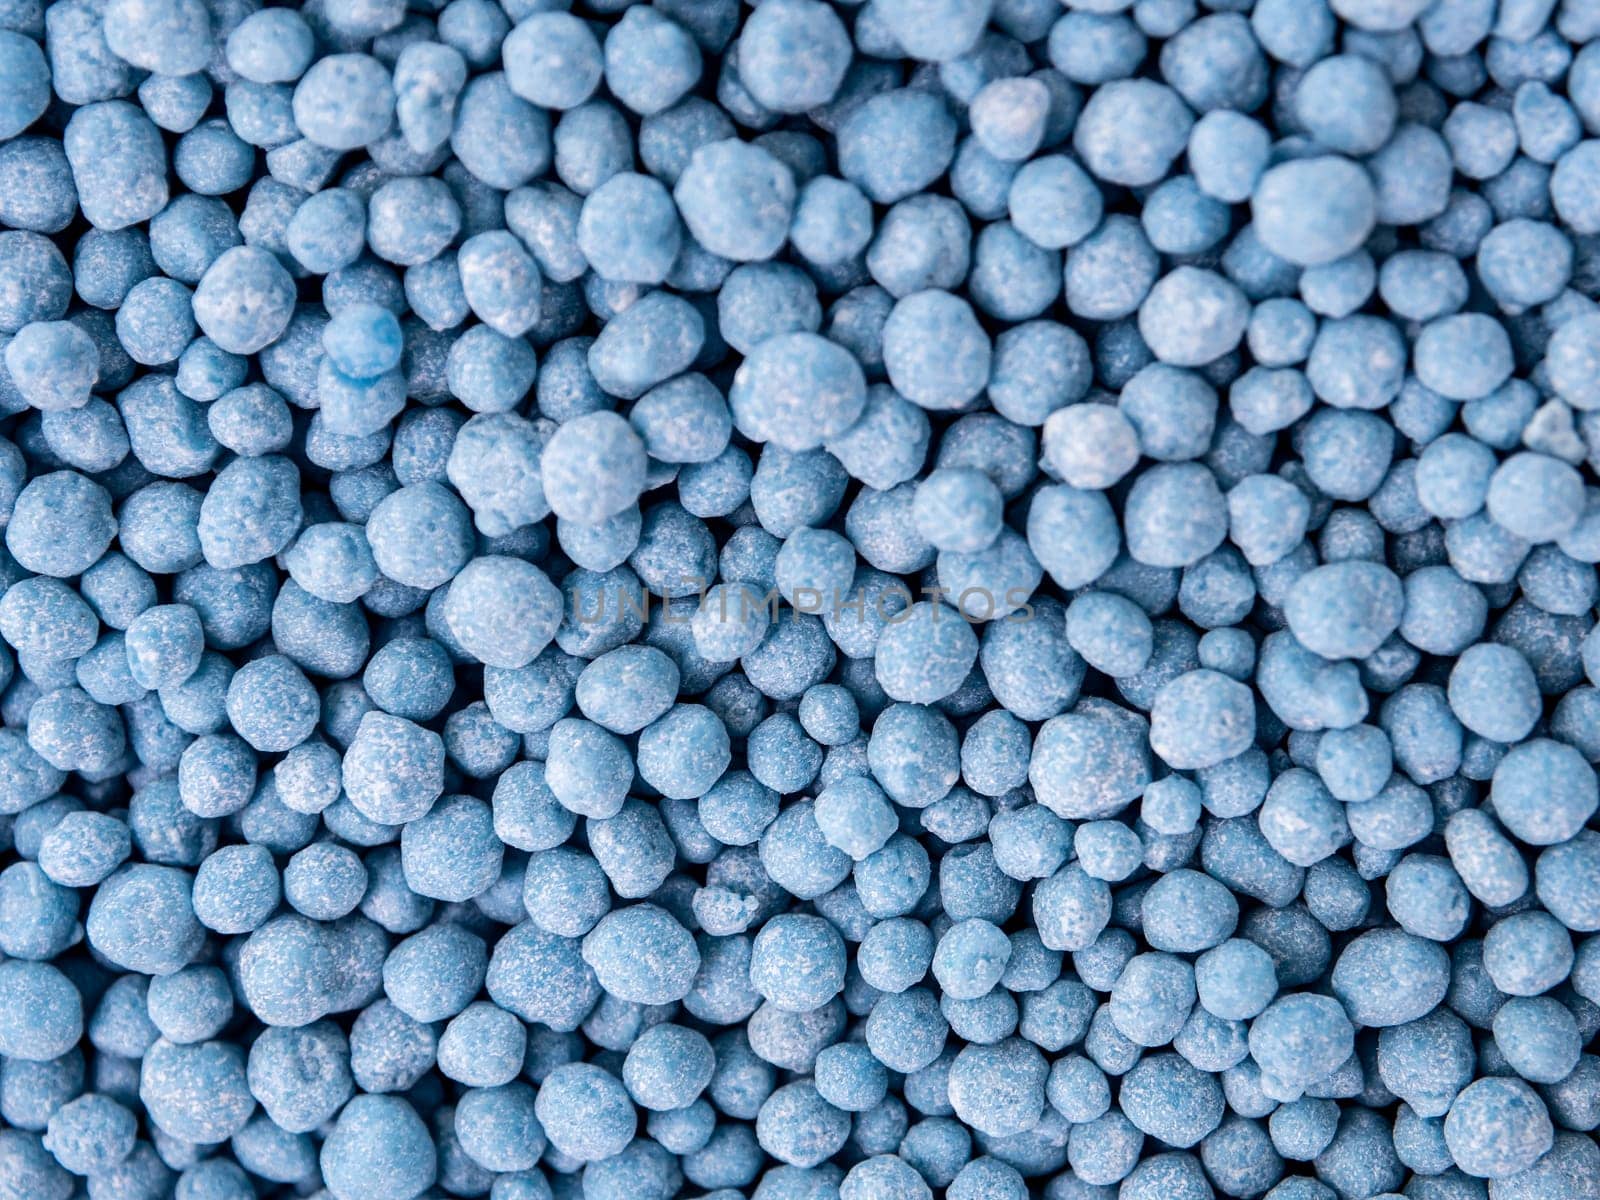 Small blue round granules are chemical fertilizers formulated to speed up flowers